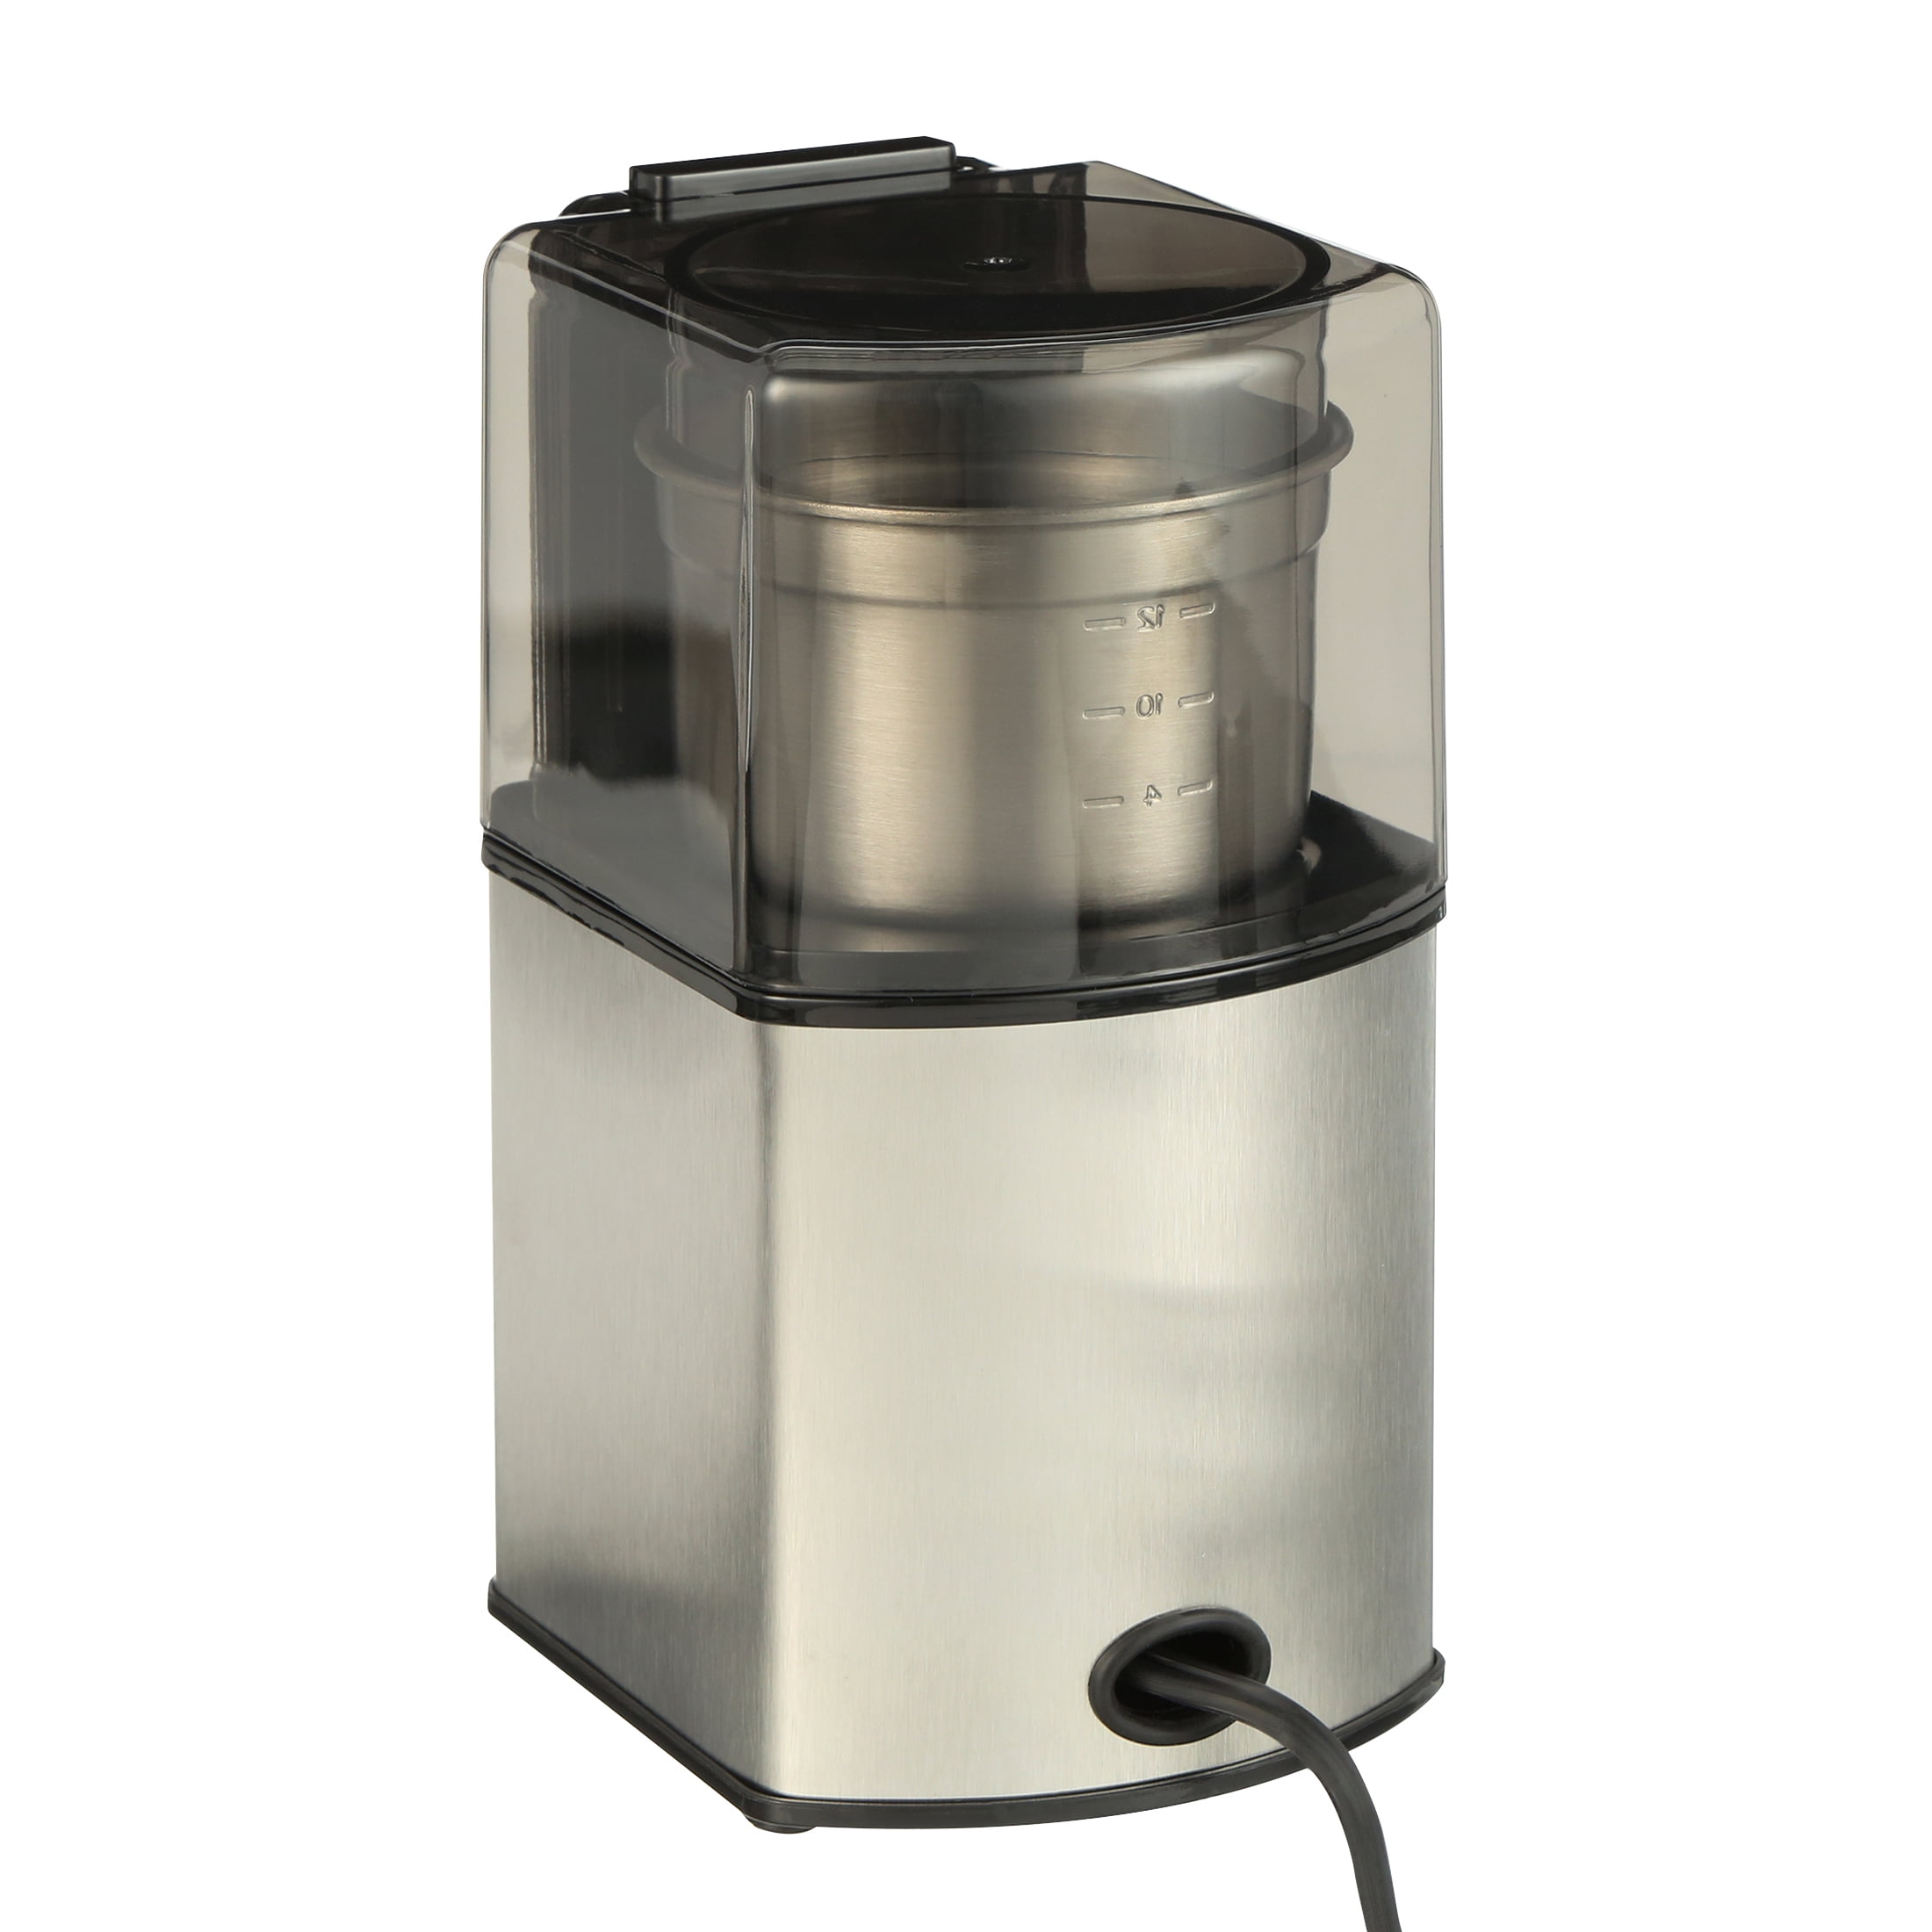 Best Buy: Cuisinart Grind Central Coffee Grinder Brushed Stainless